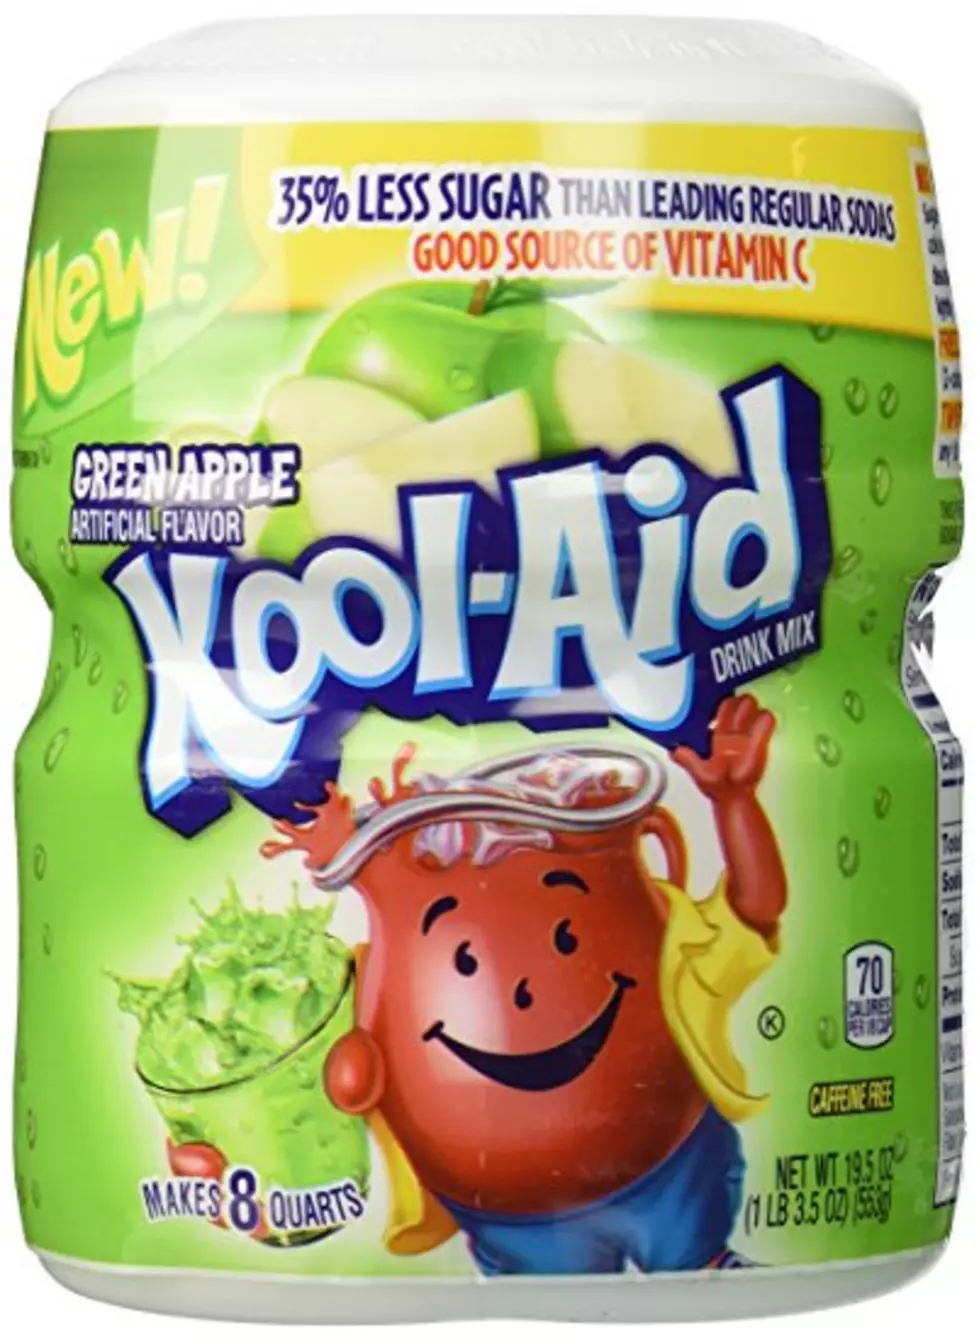 Believe It Or Not: Kool Aid Pickles Are A Thing!